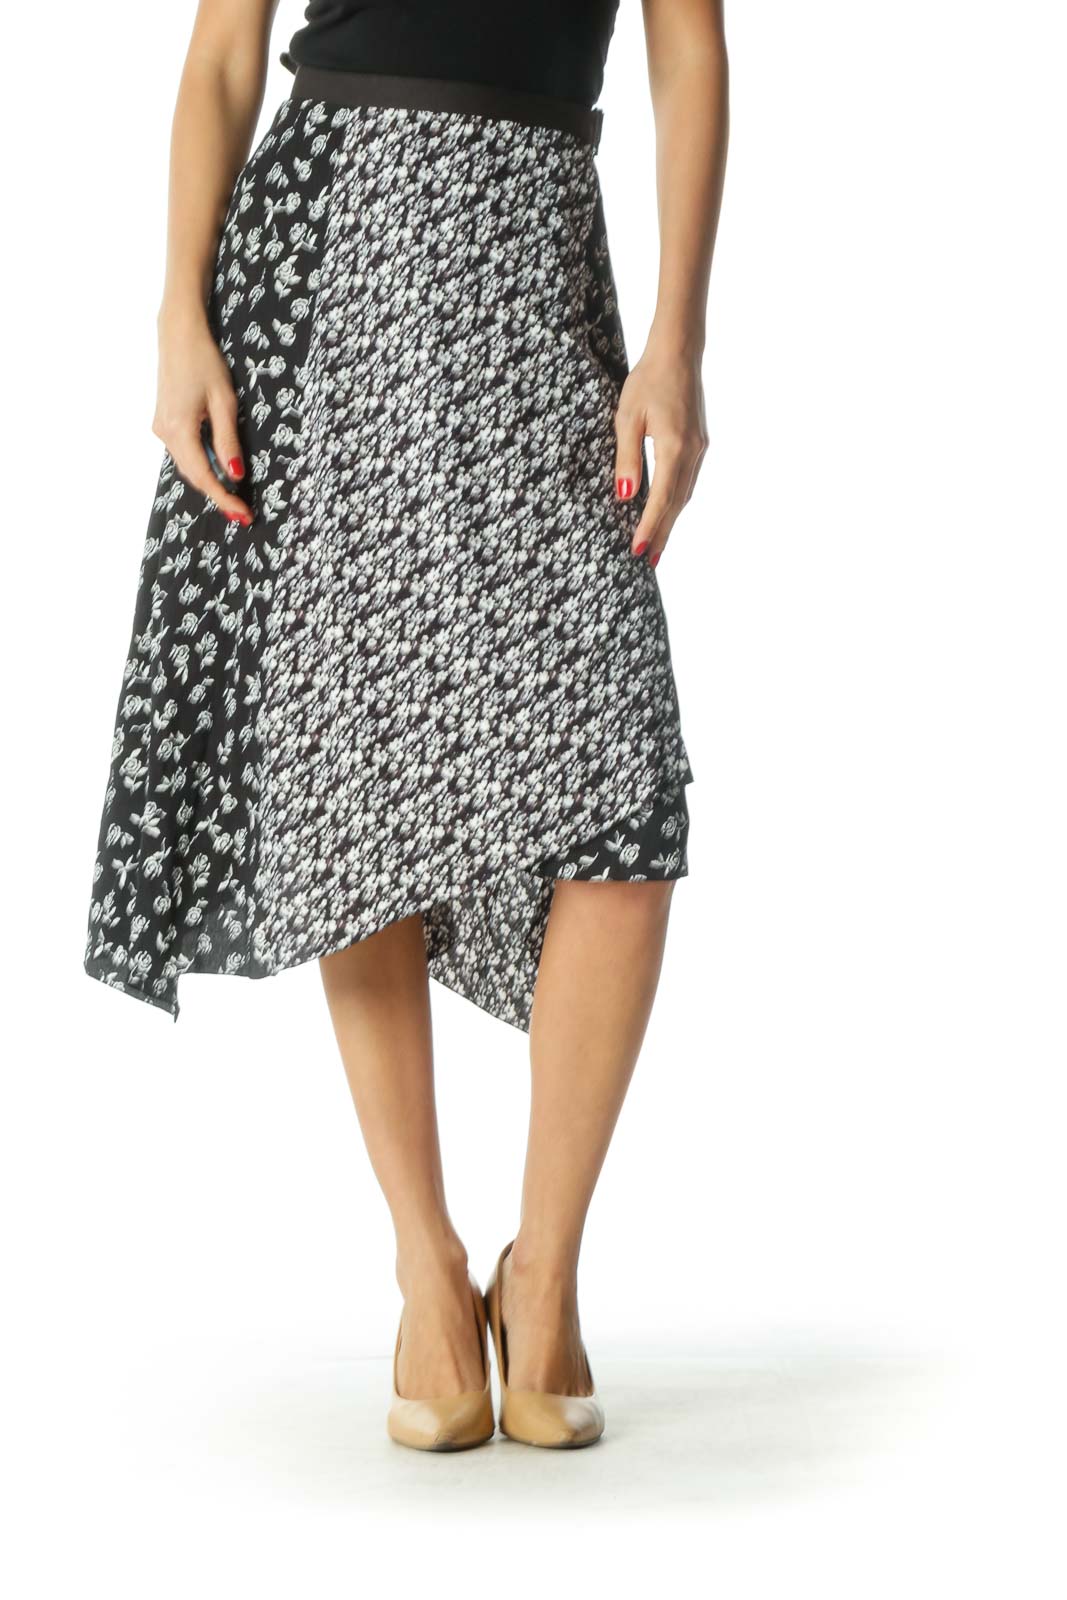 Black and White Floral Print Asymmetrical Skirt Front